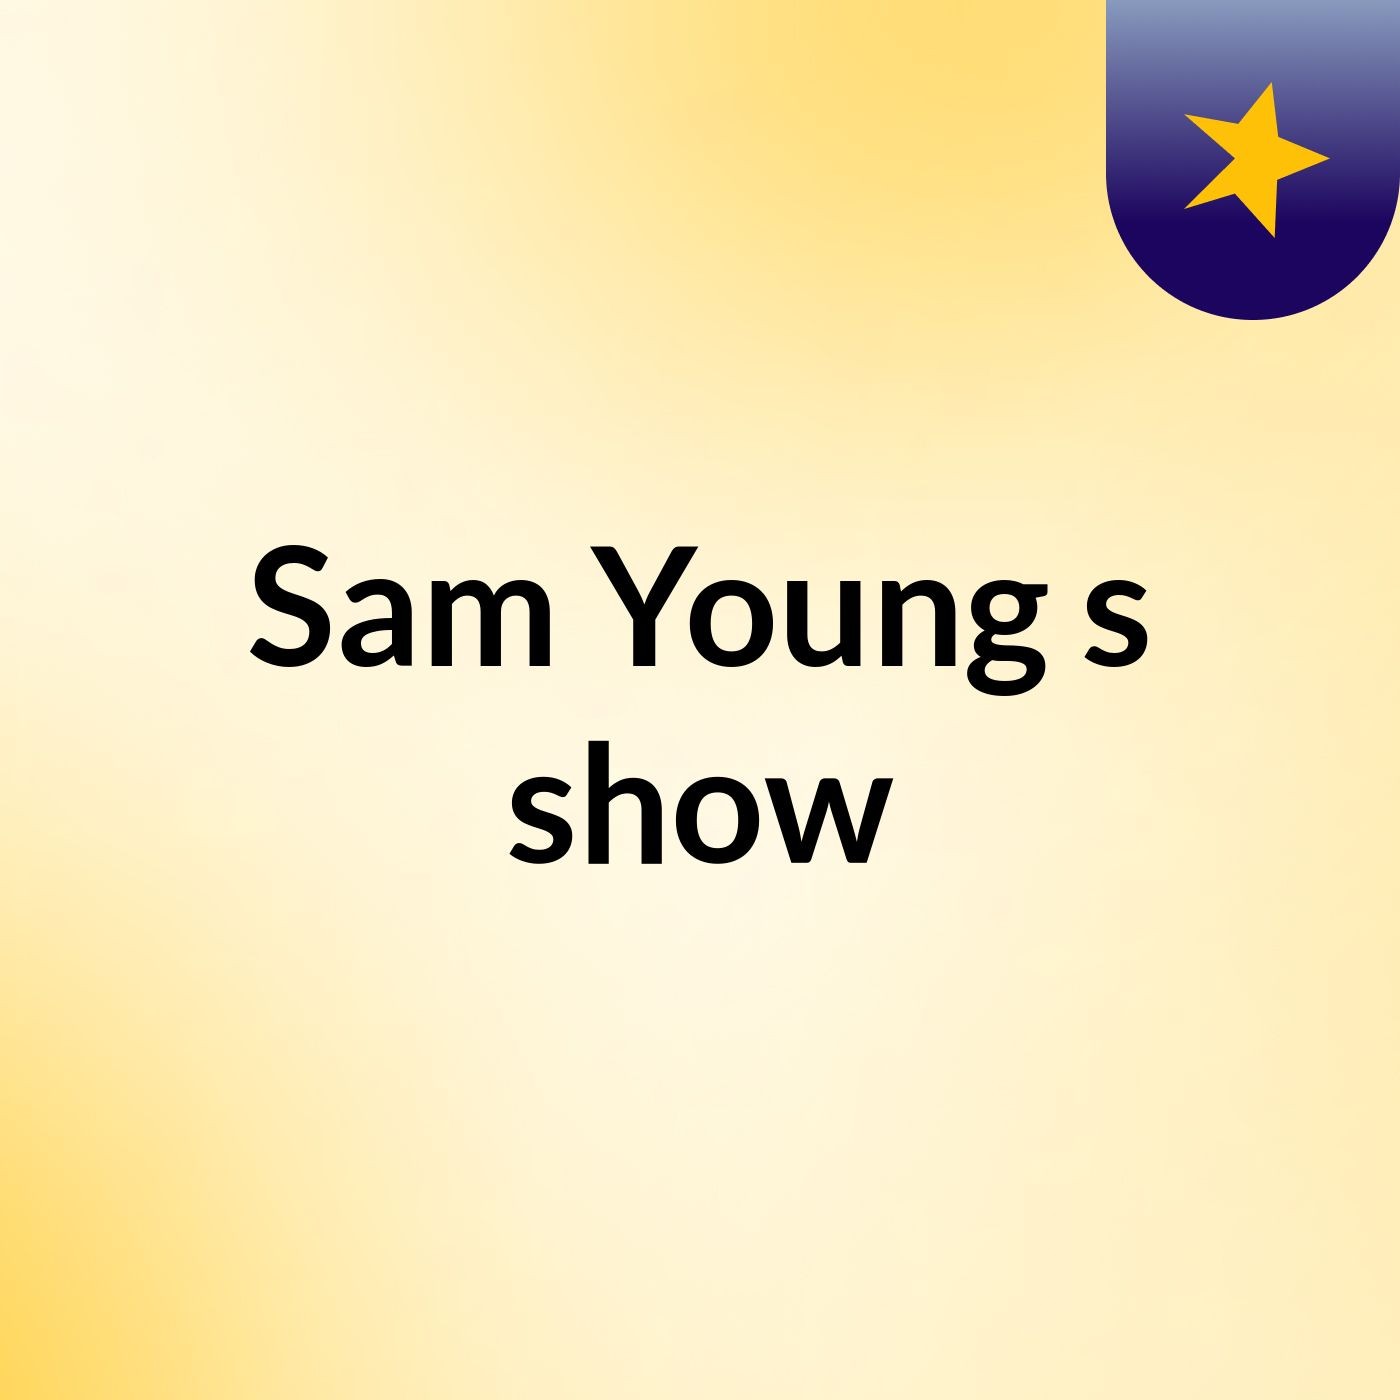 Sam Young's show